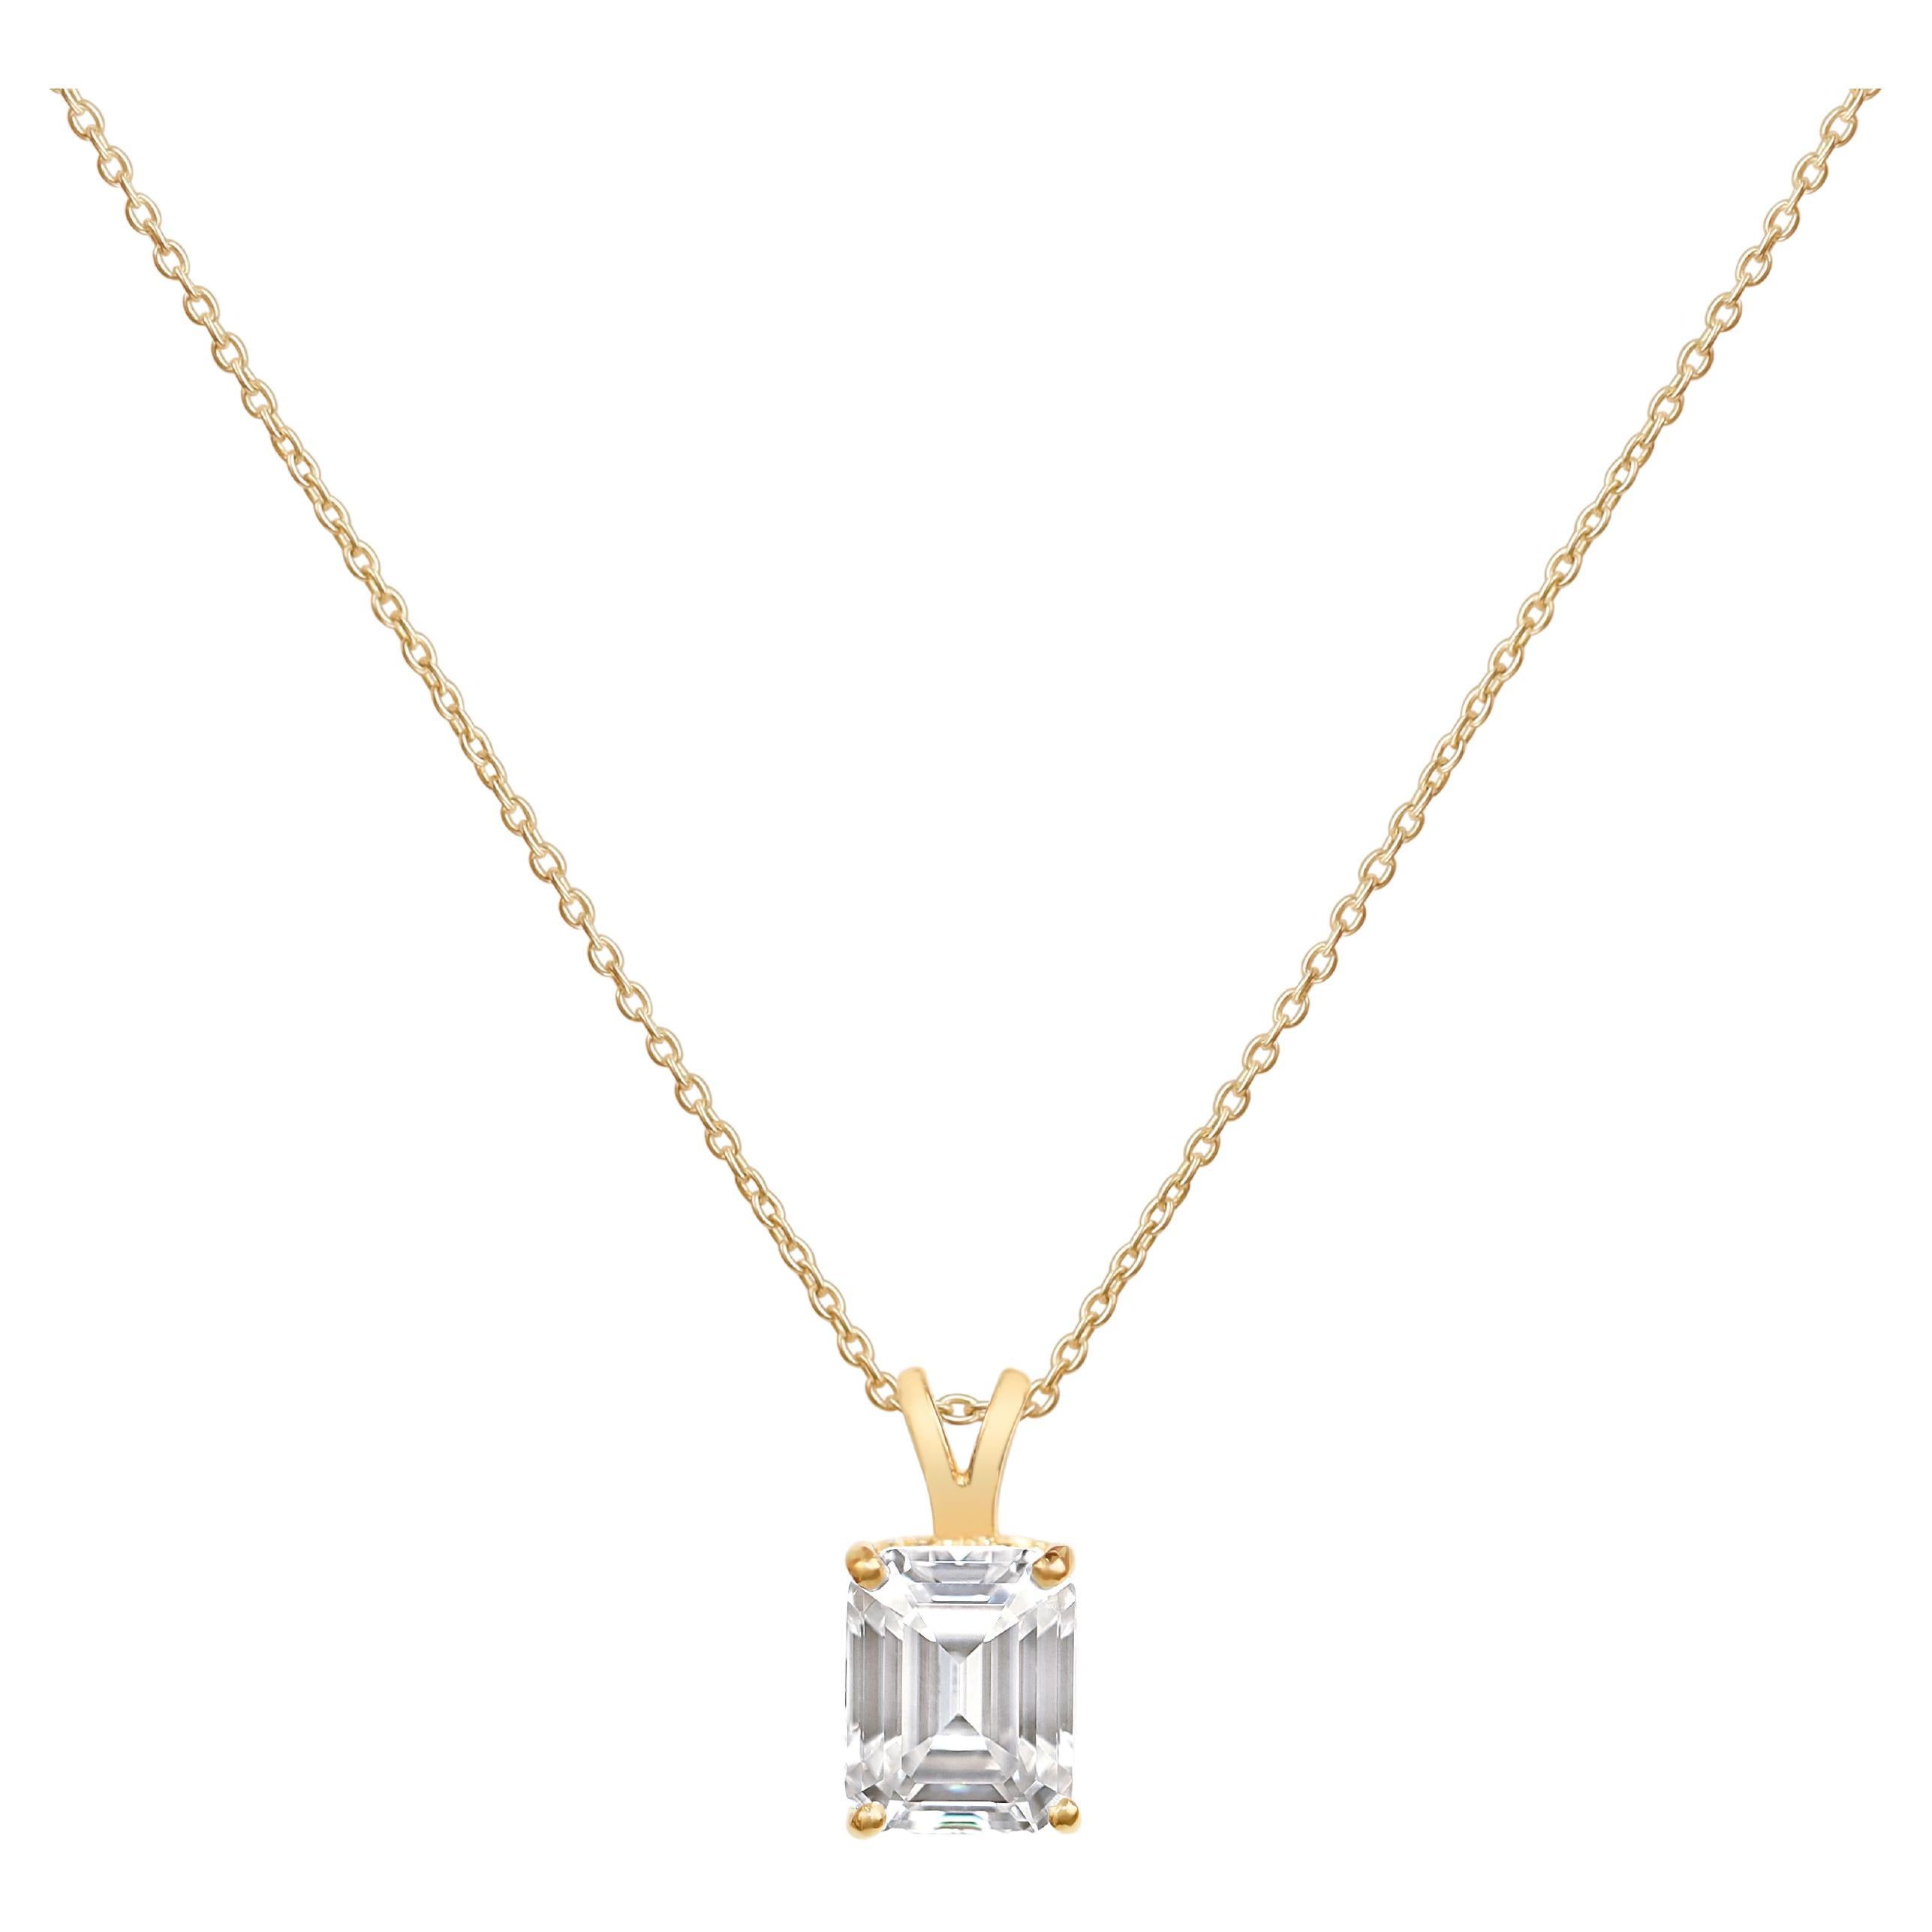 GIA Report Certified 4 Carat Emerald Cut Diamond 18k Yellow Gold Pendant for her